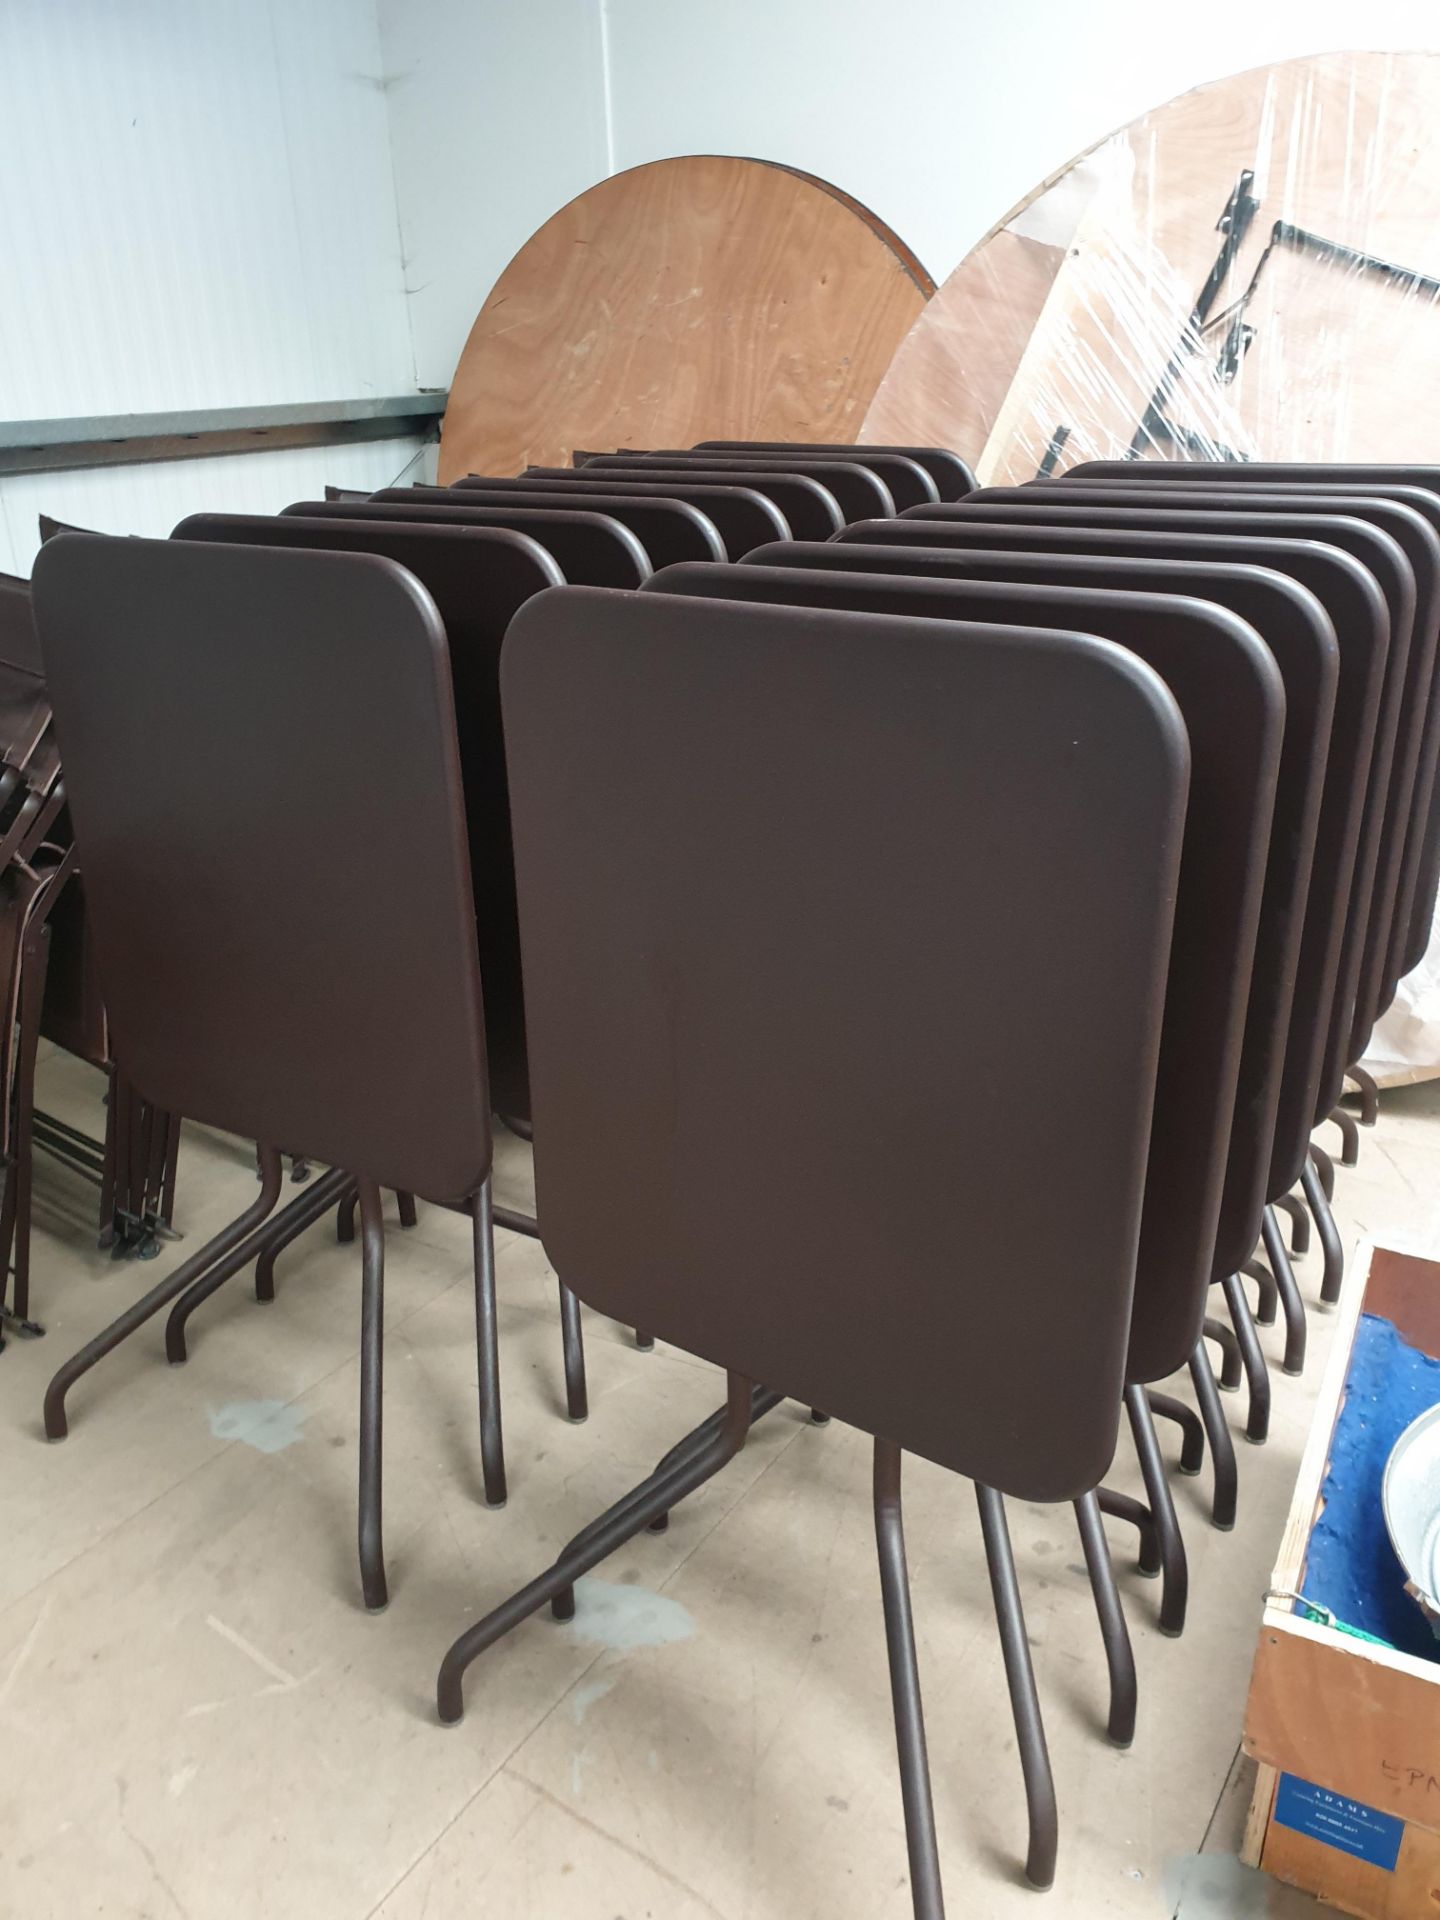 * 2x Fermob Brown Tables and 3x Fermob Brown Chairs (1 with small hole in seat)